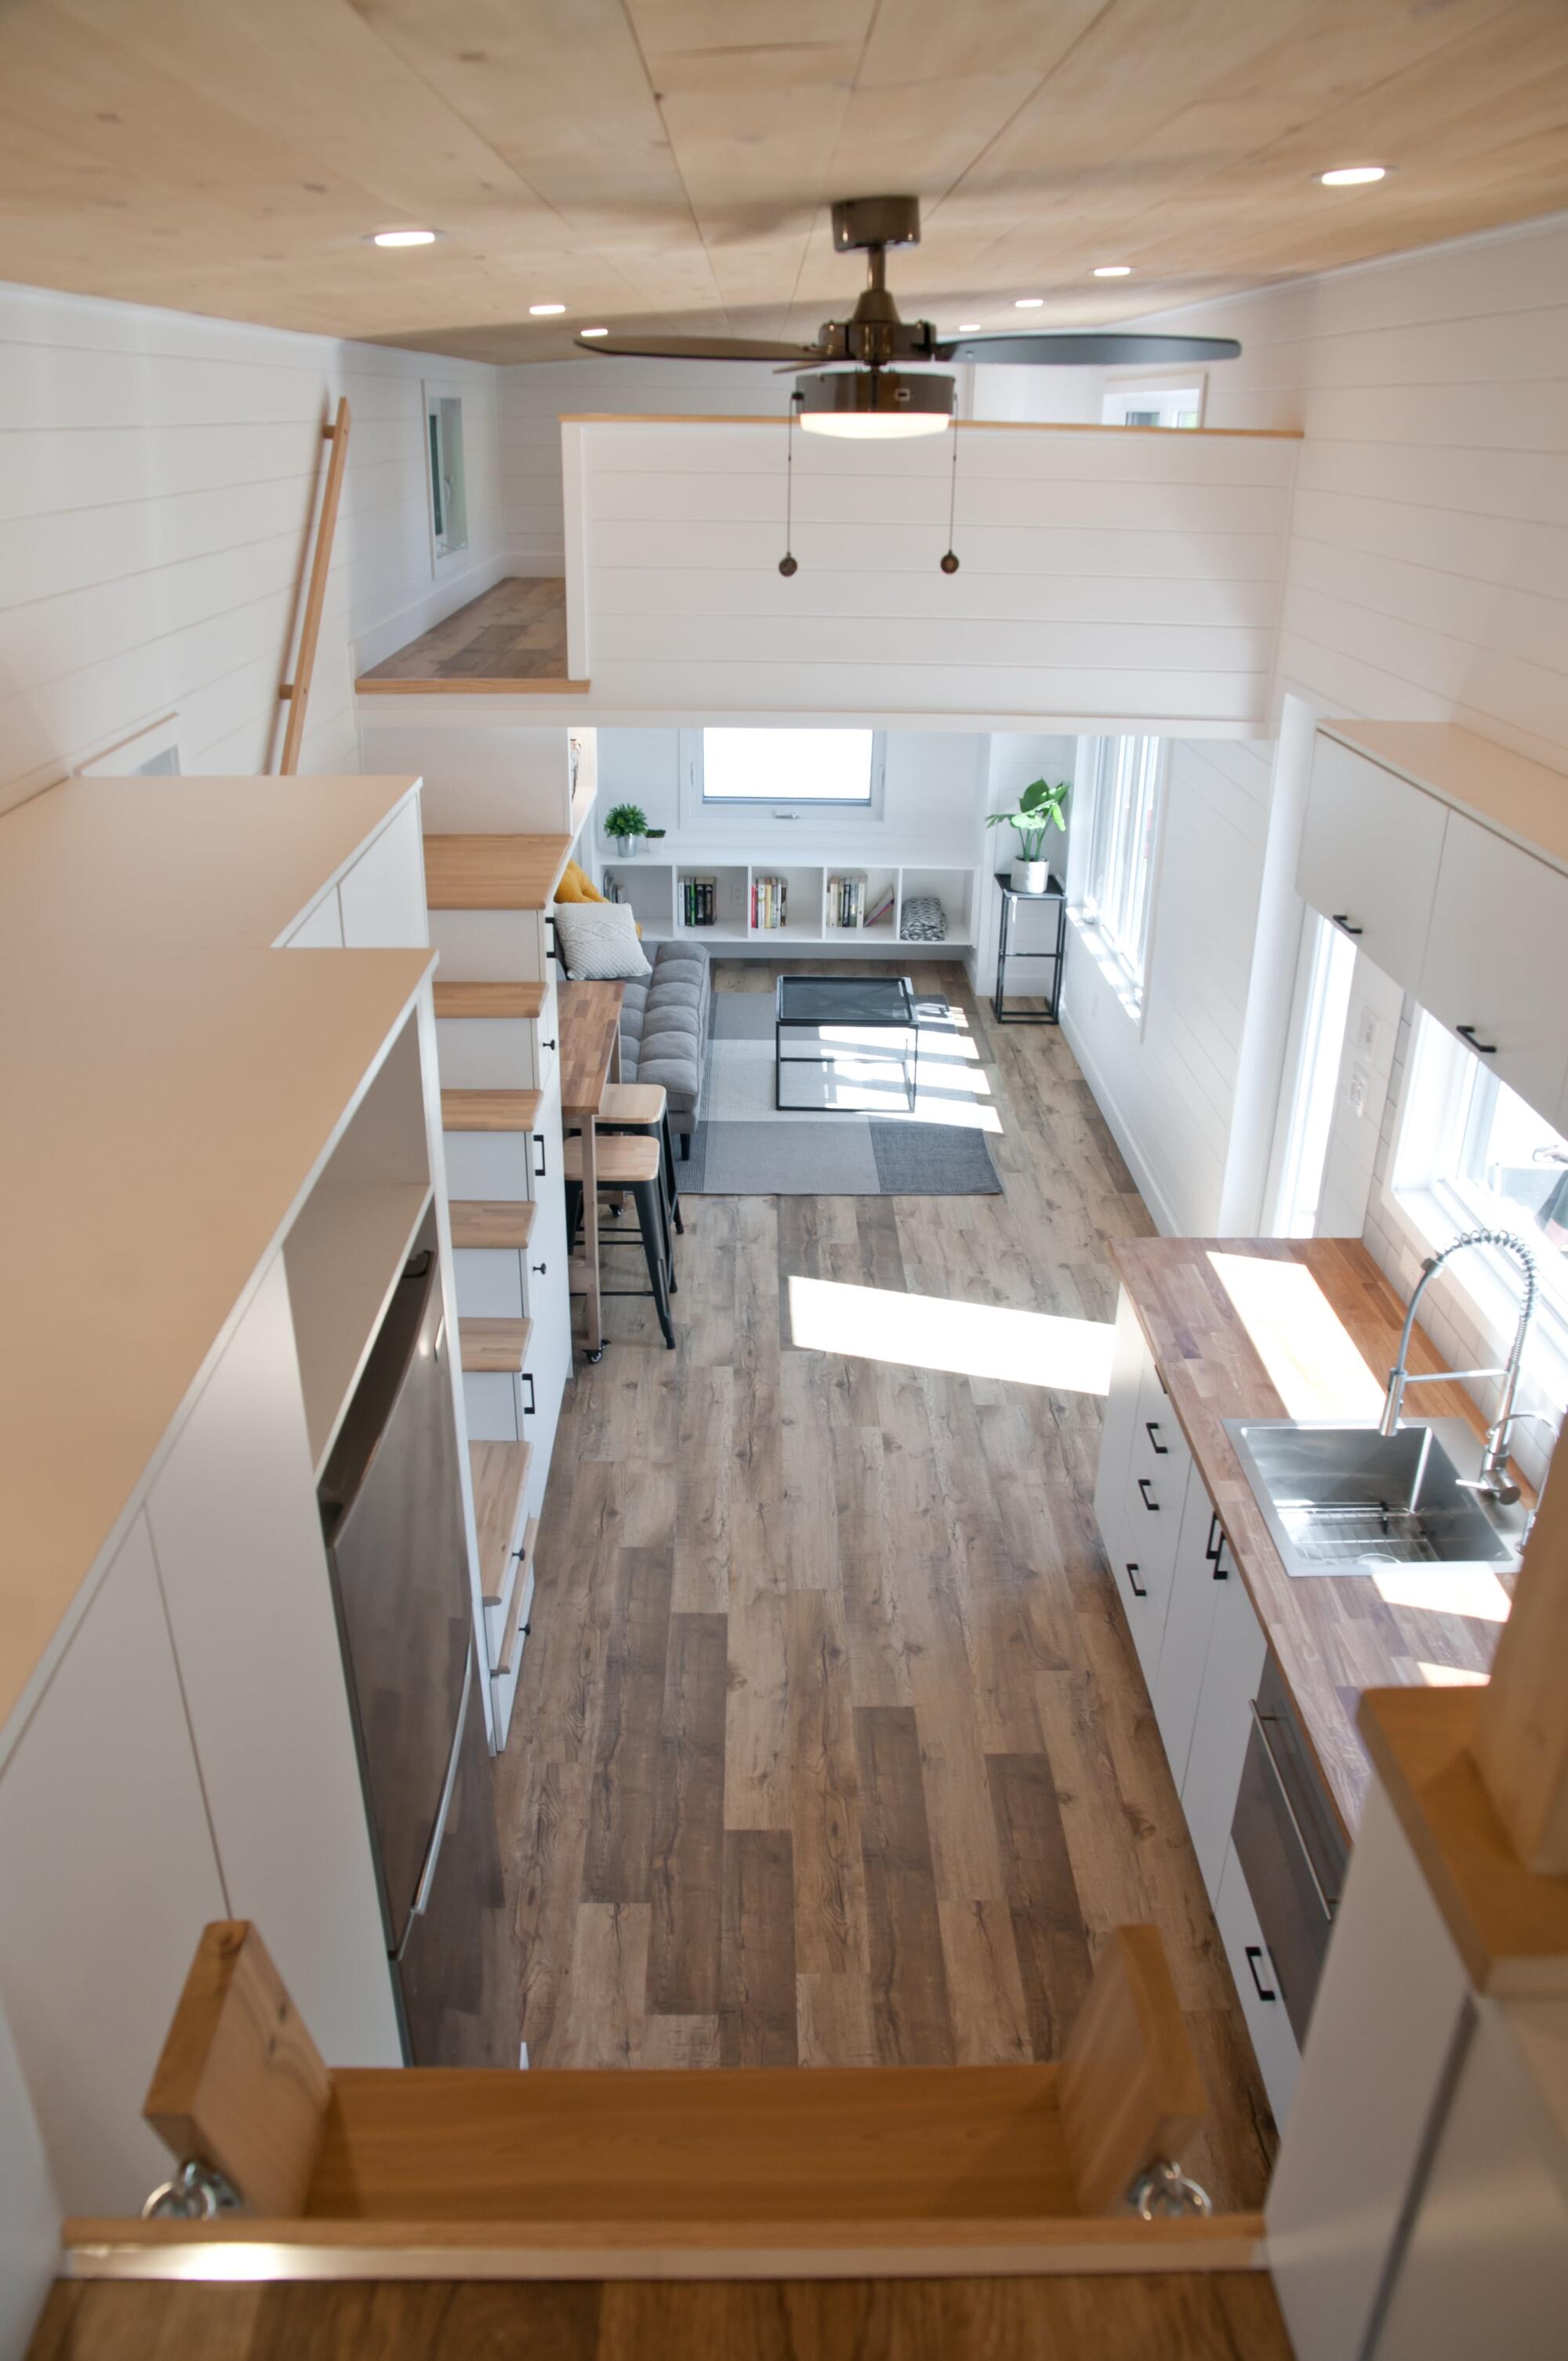 View of inside of a tiny home